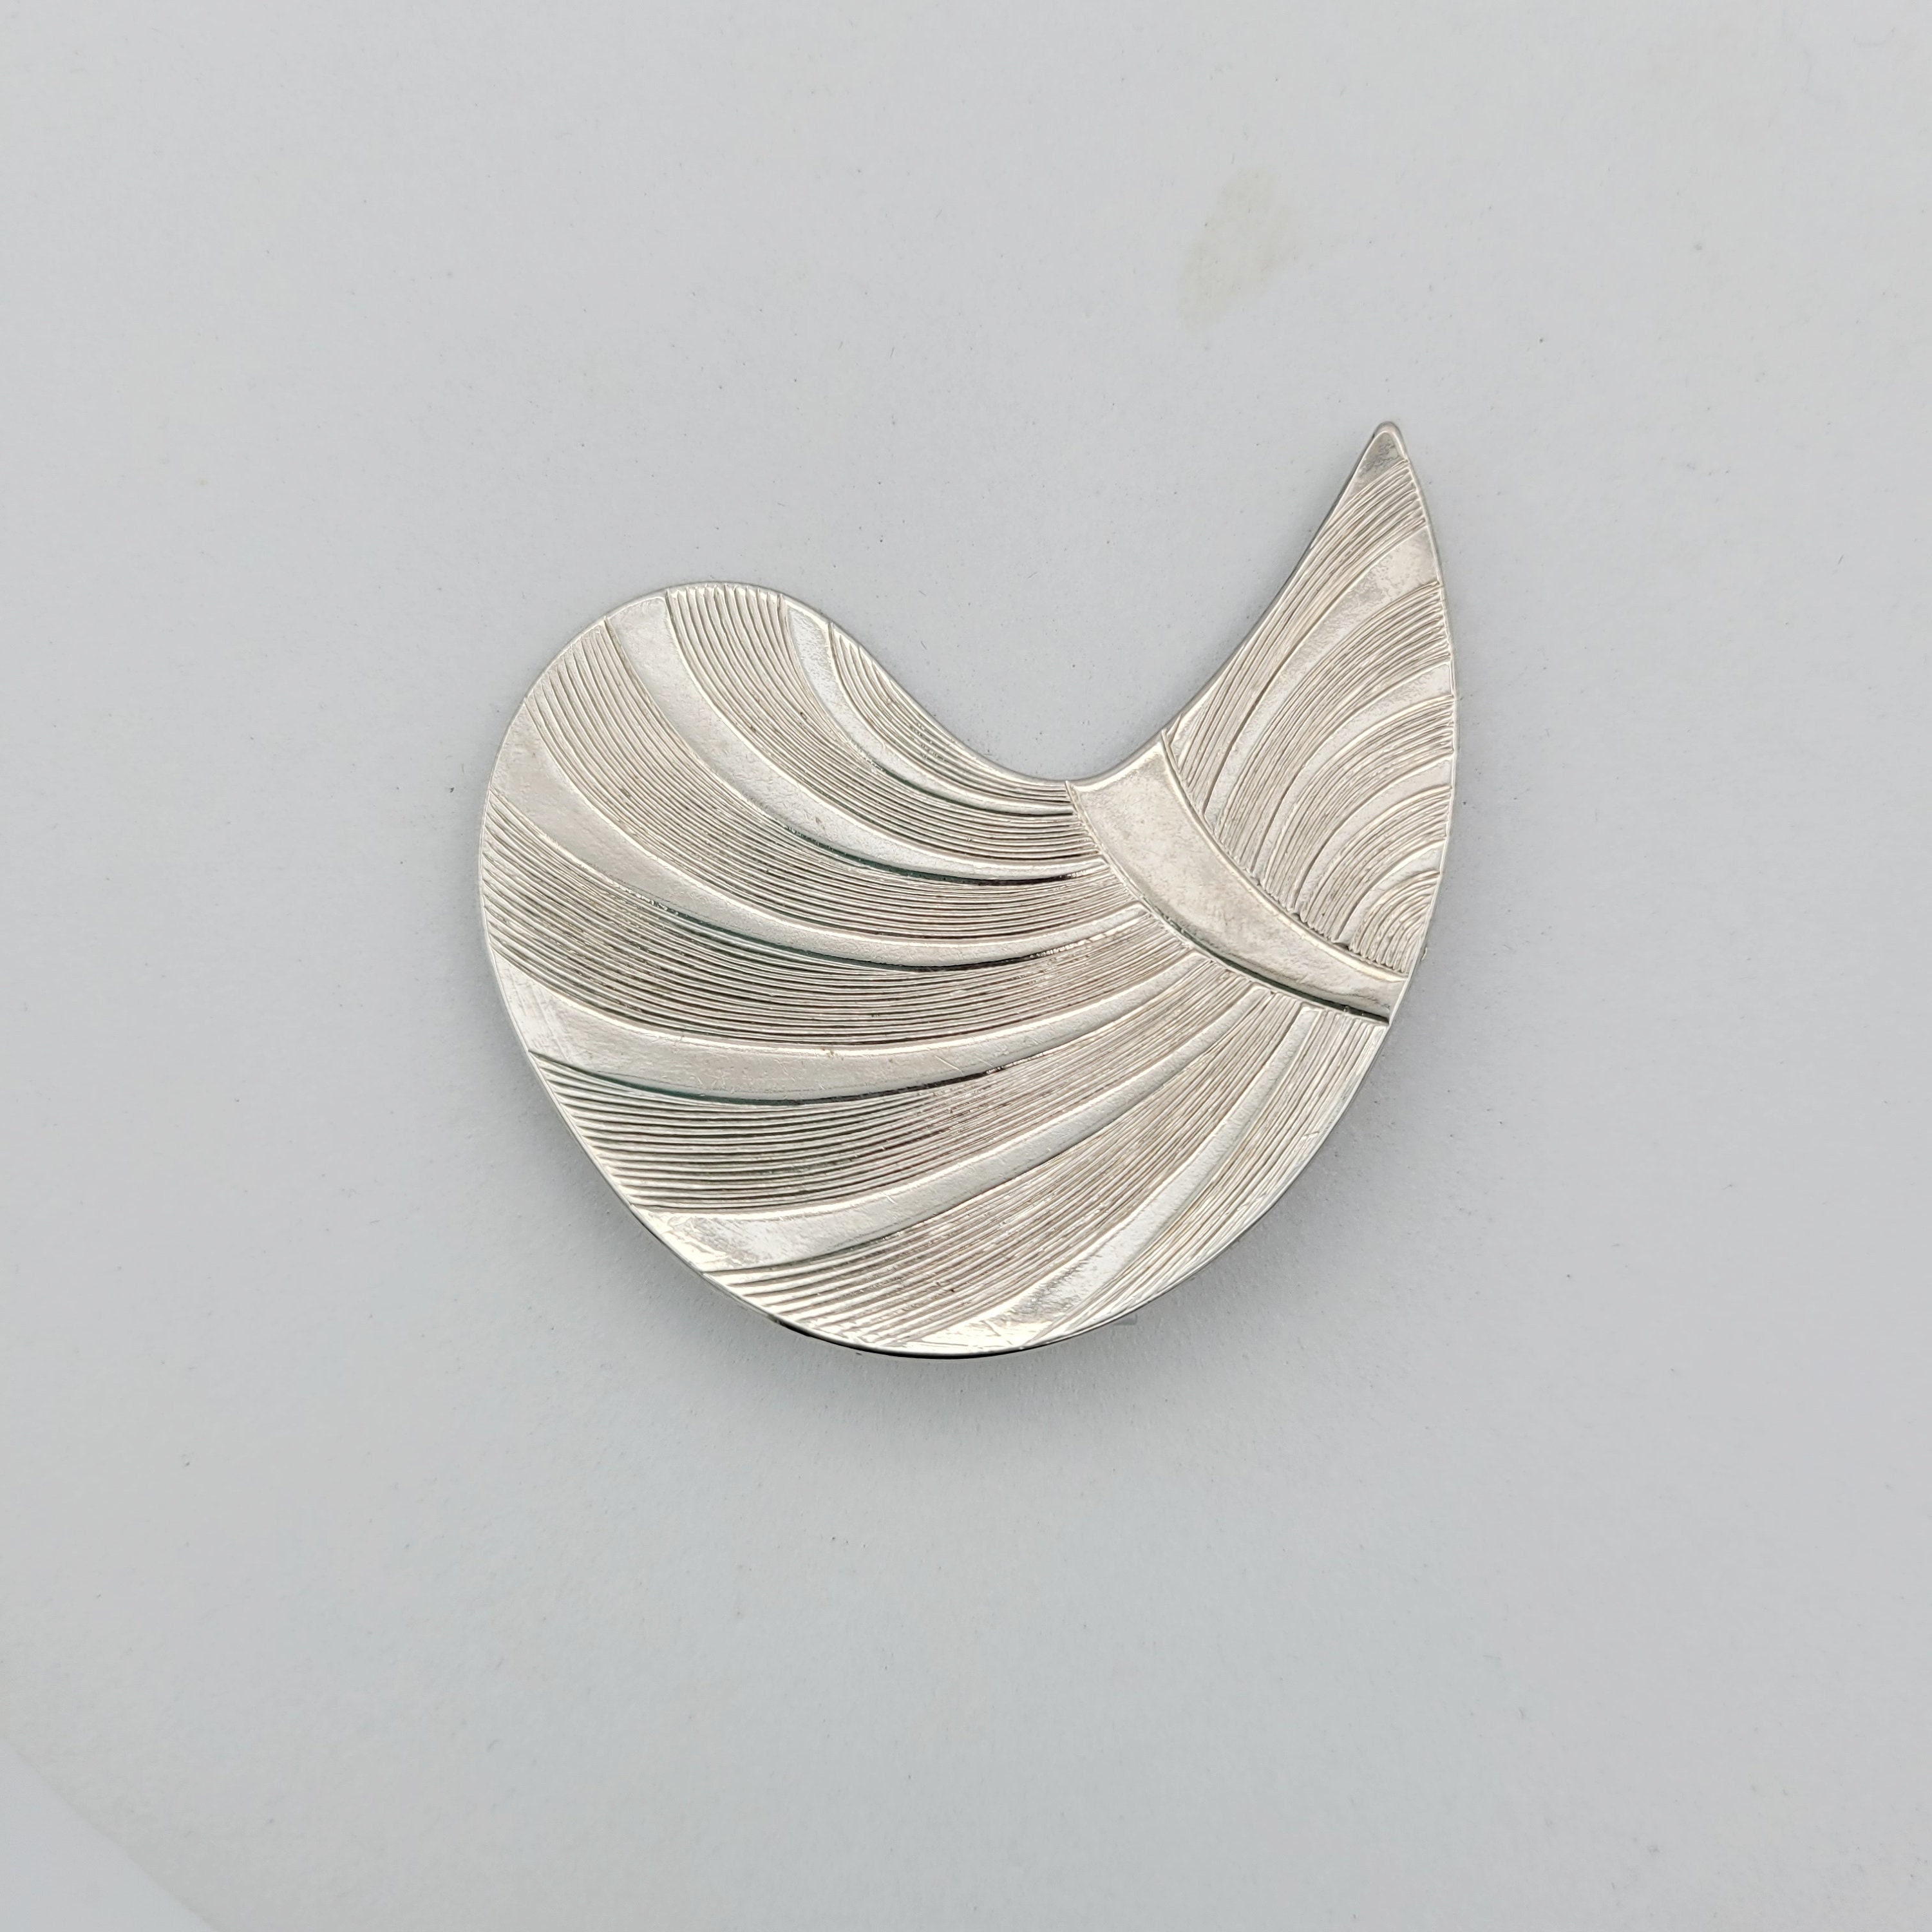 Scarf Clip-silver Plated Double Sea Shell Shaped Scarf Ring Clip